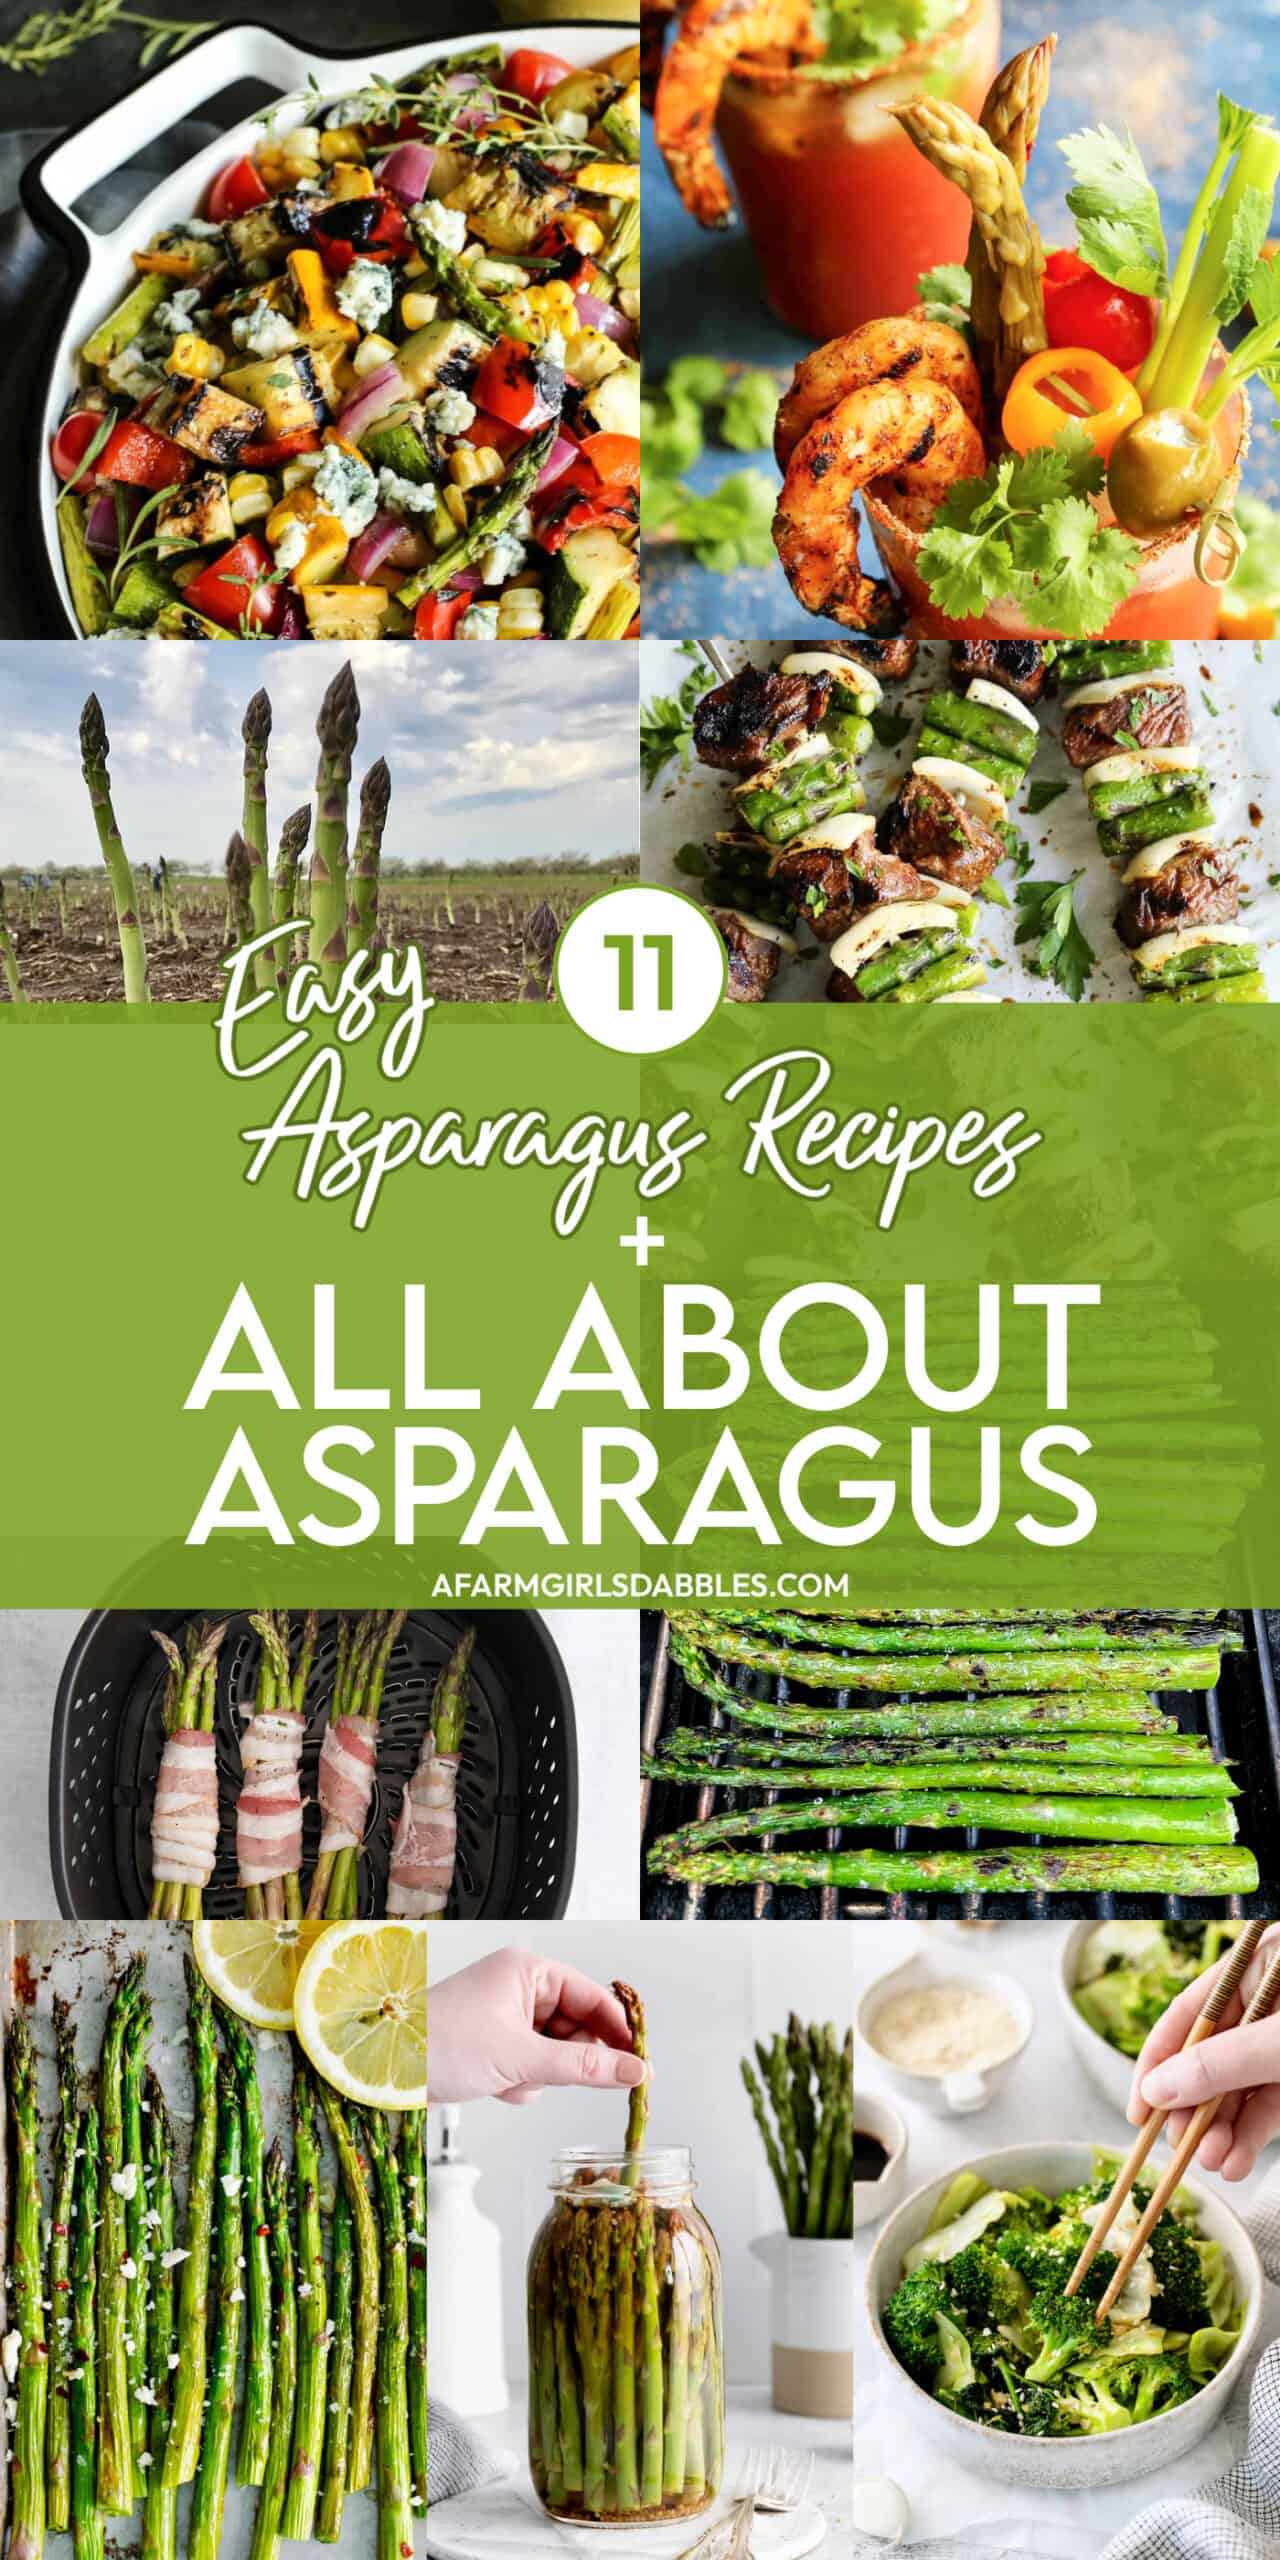 Pinterest image for All About Asparagus + 11 Asparagus Recipes